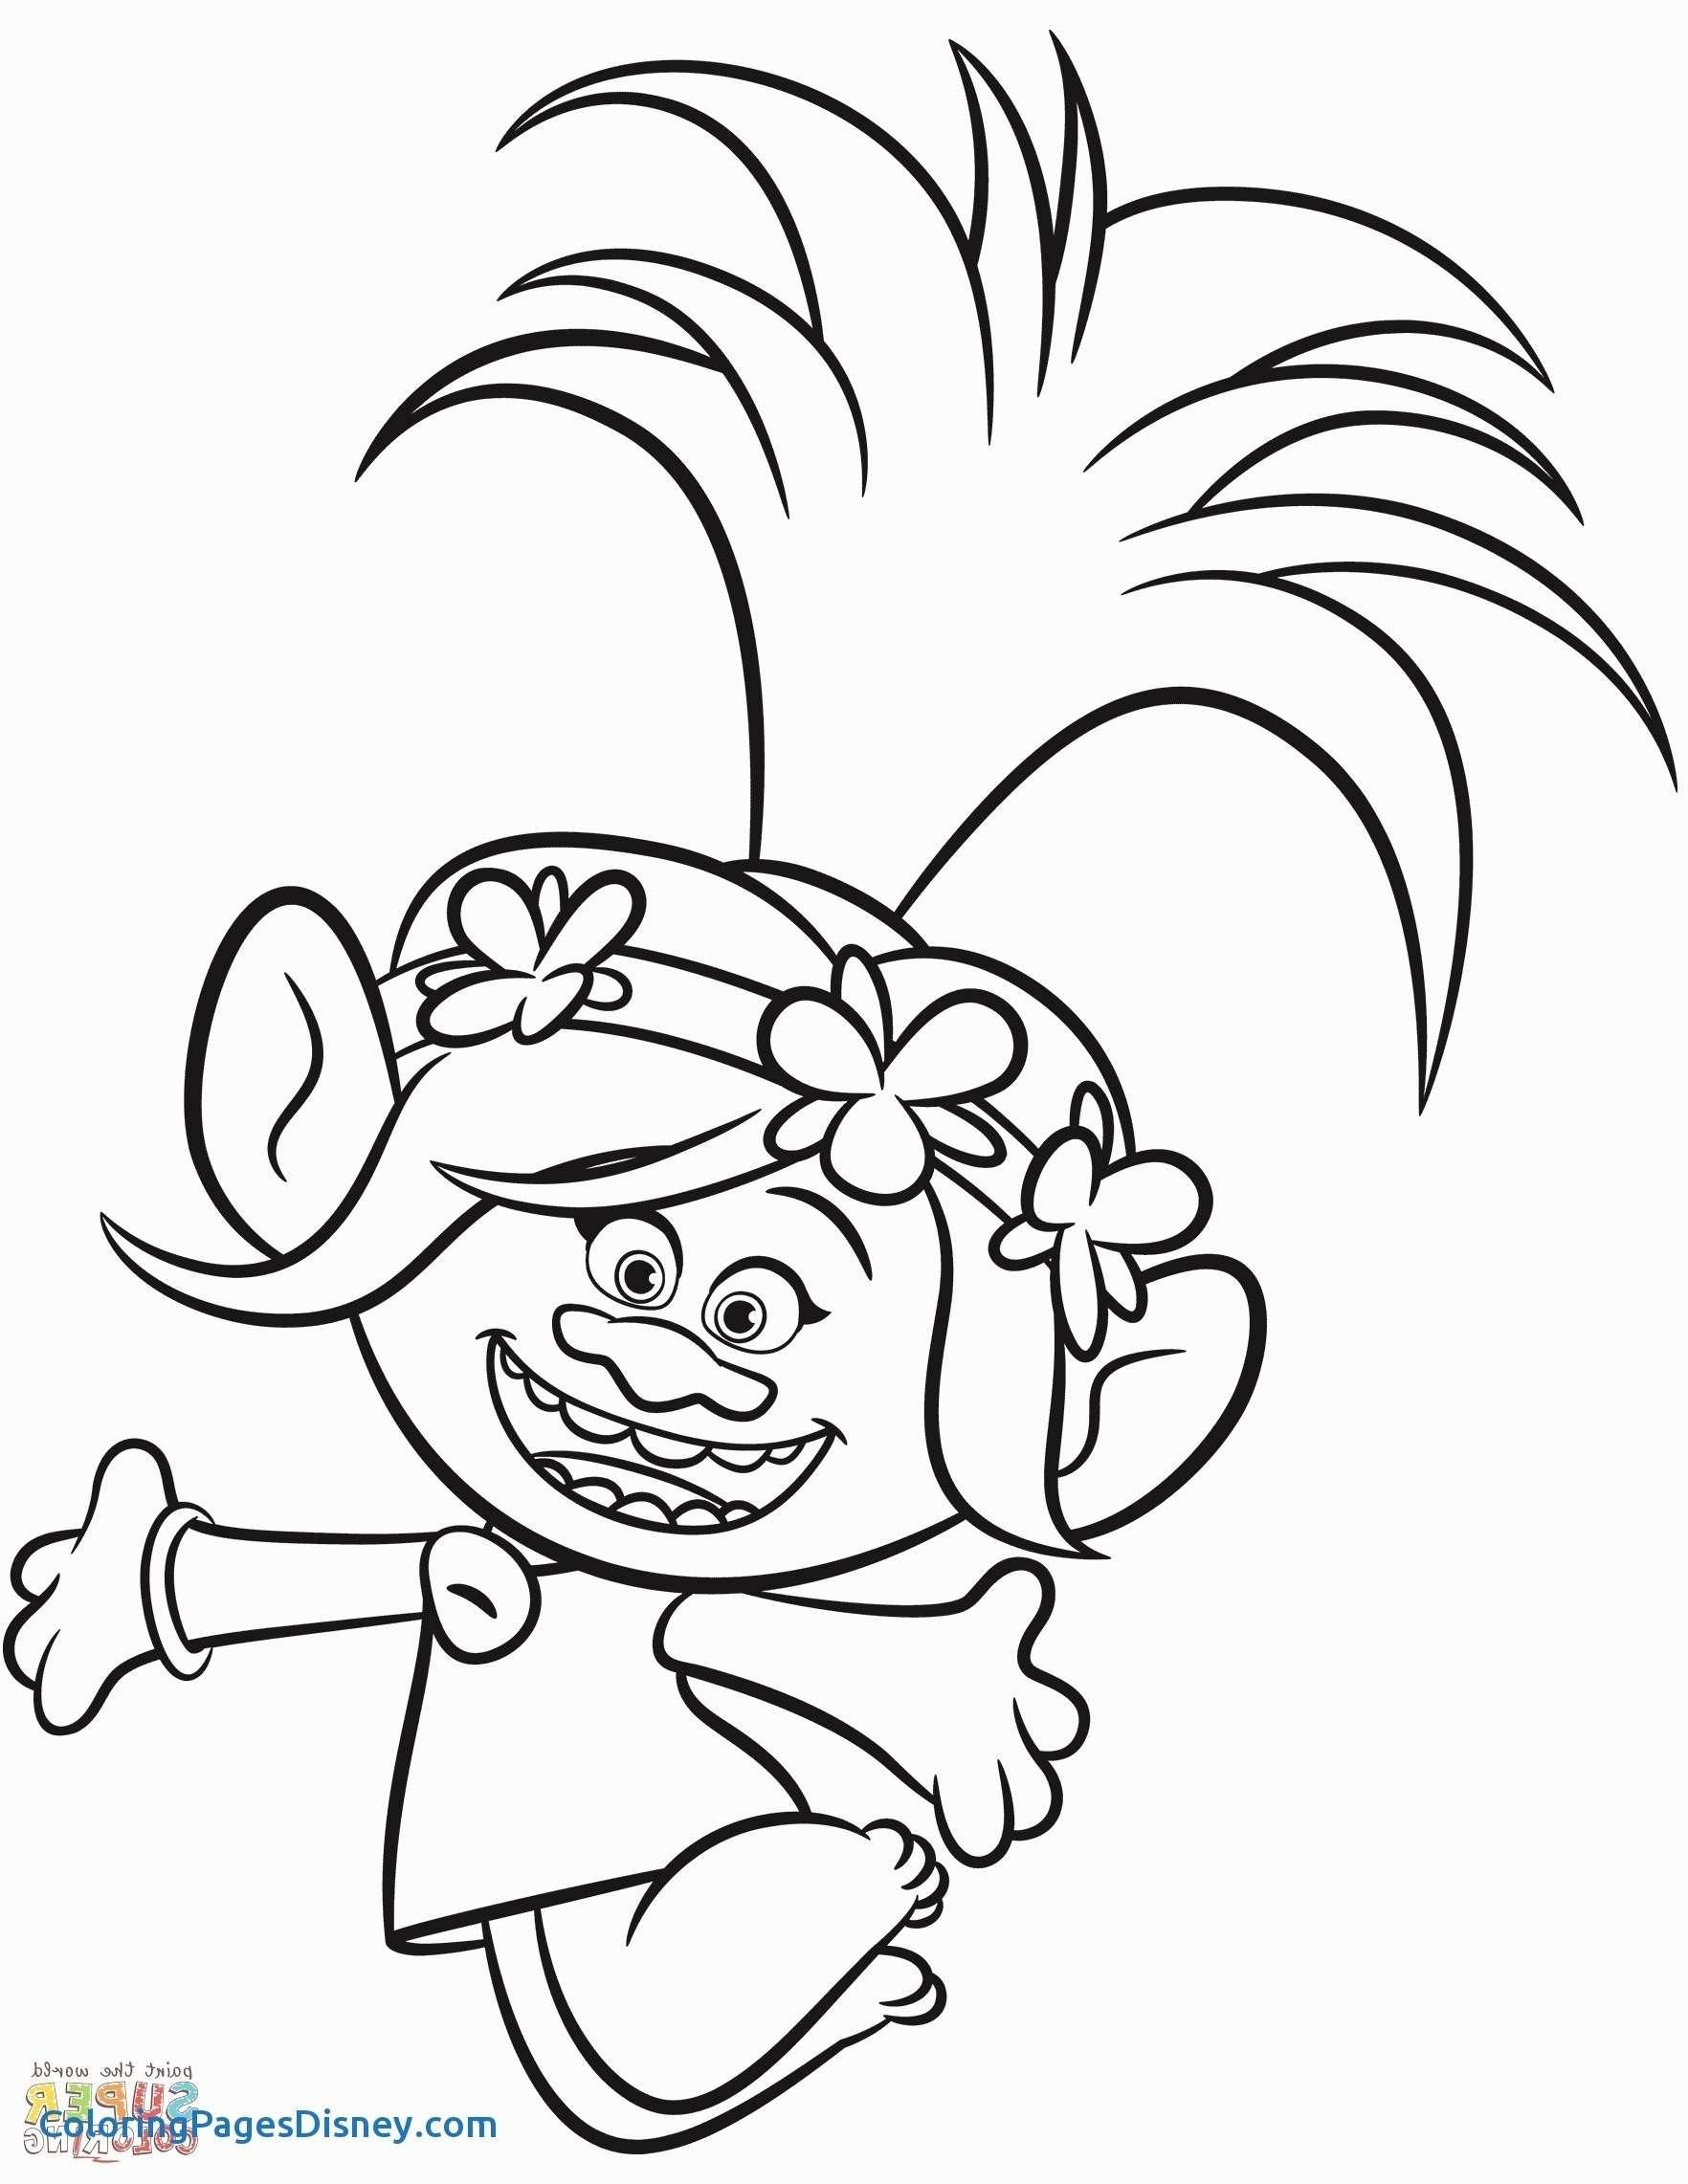 coloring-page-awesome-trollsloring-sheets-photo-ideas-pages-poppy